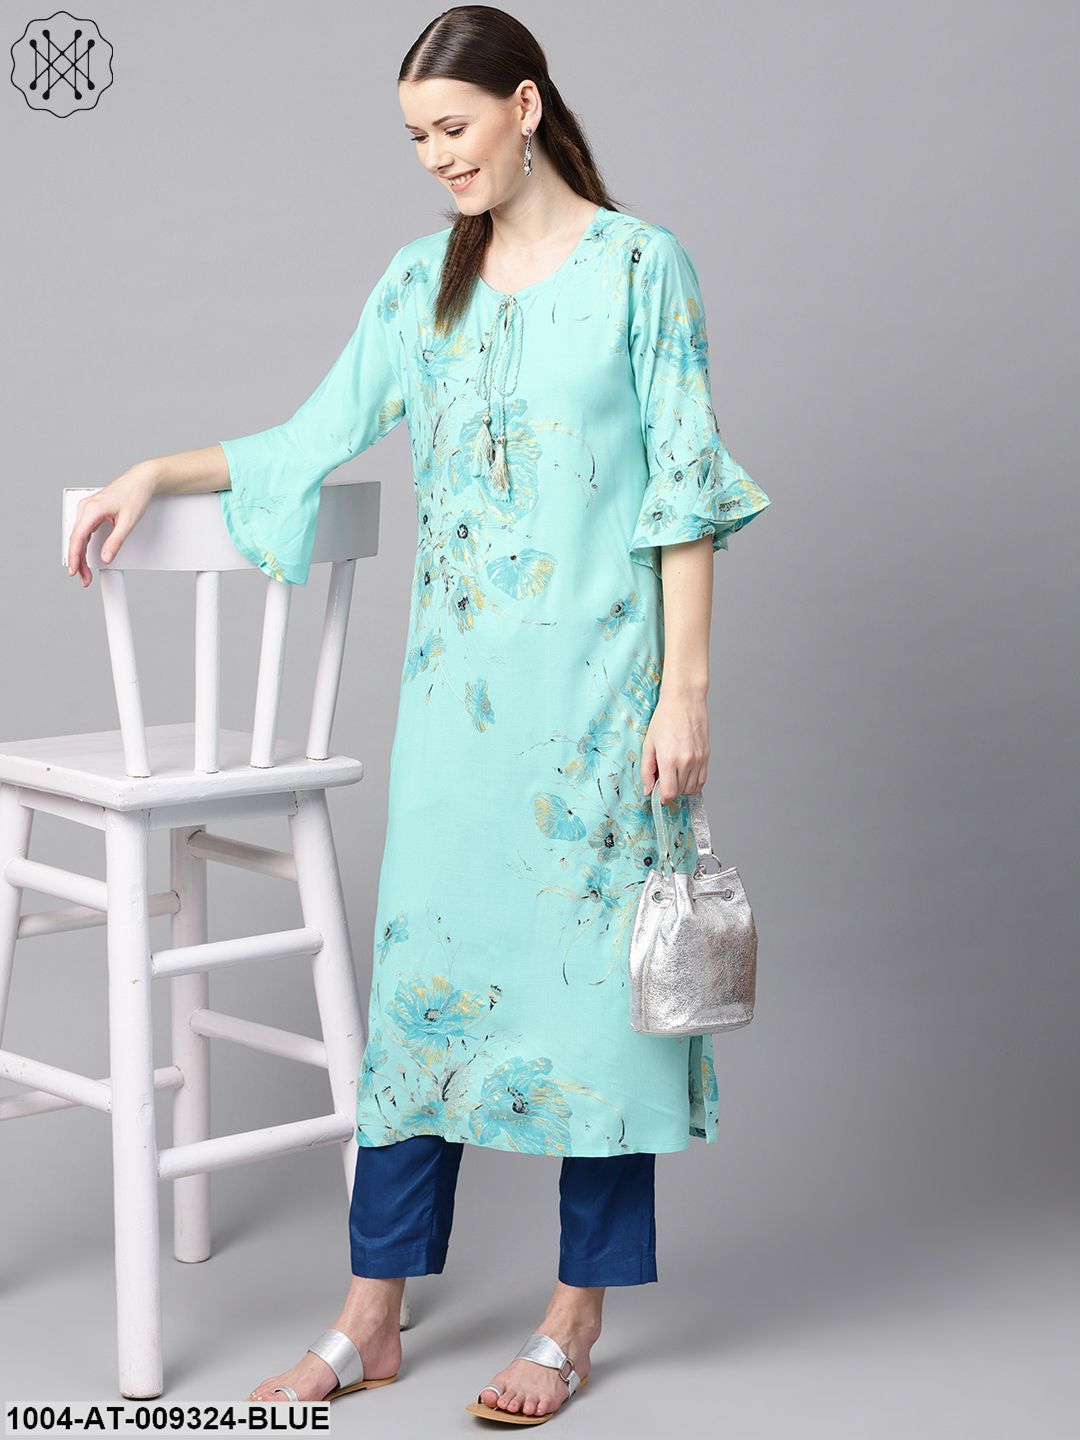 Sky Blue Floral Foil Printed Round Neck With V-Slit And Tassels Detailing Flared Sleeve Straight Kurta